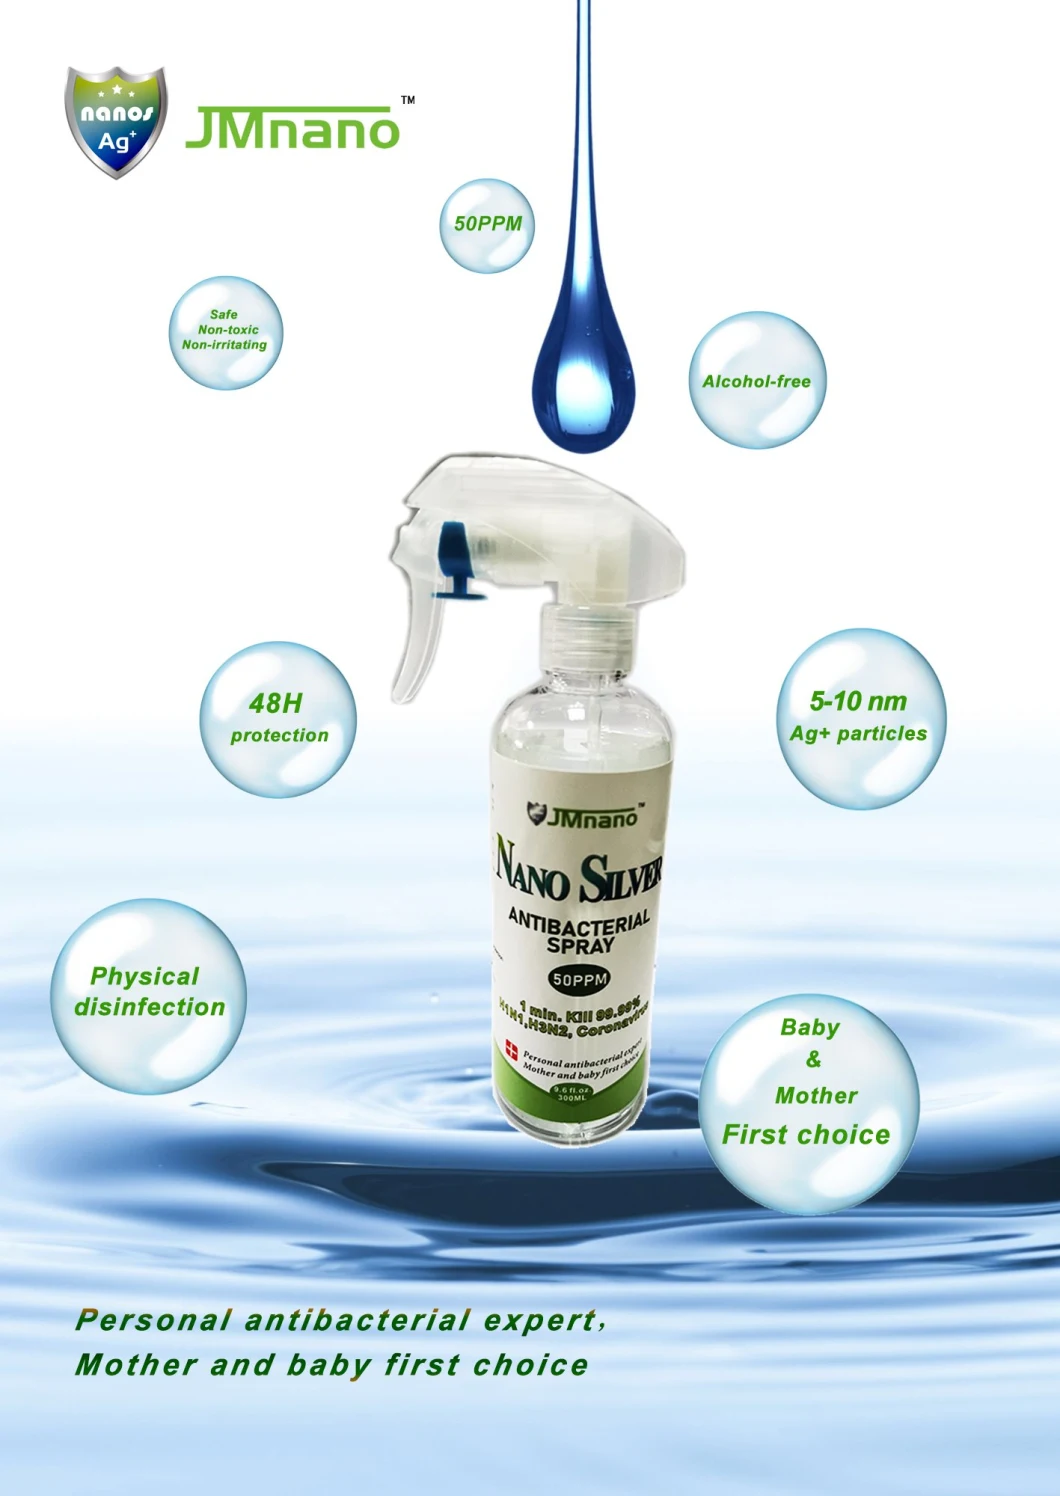 FDA Ce Waterless Nano Silver Factory Disinfectant Products